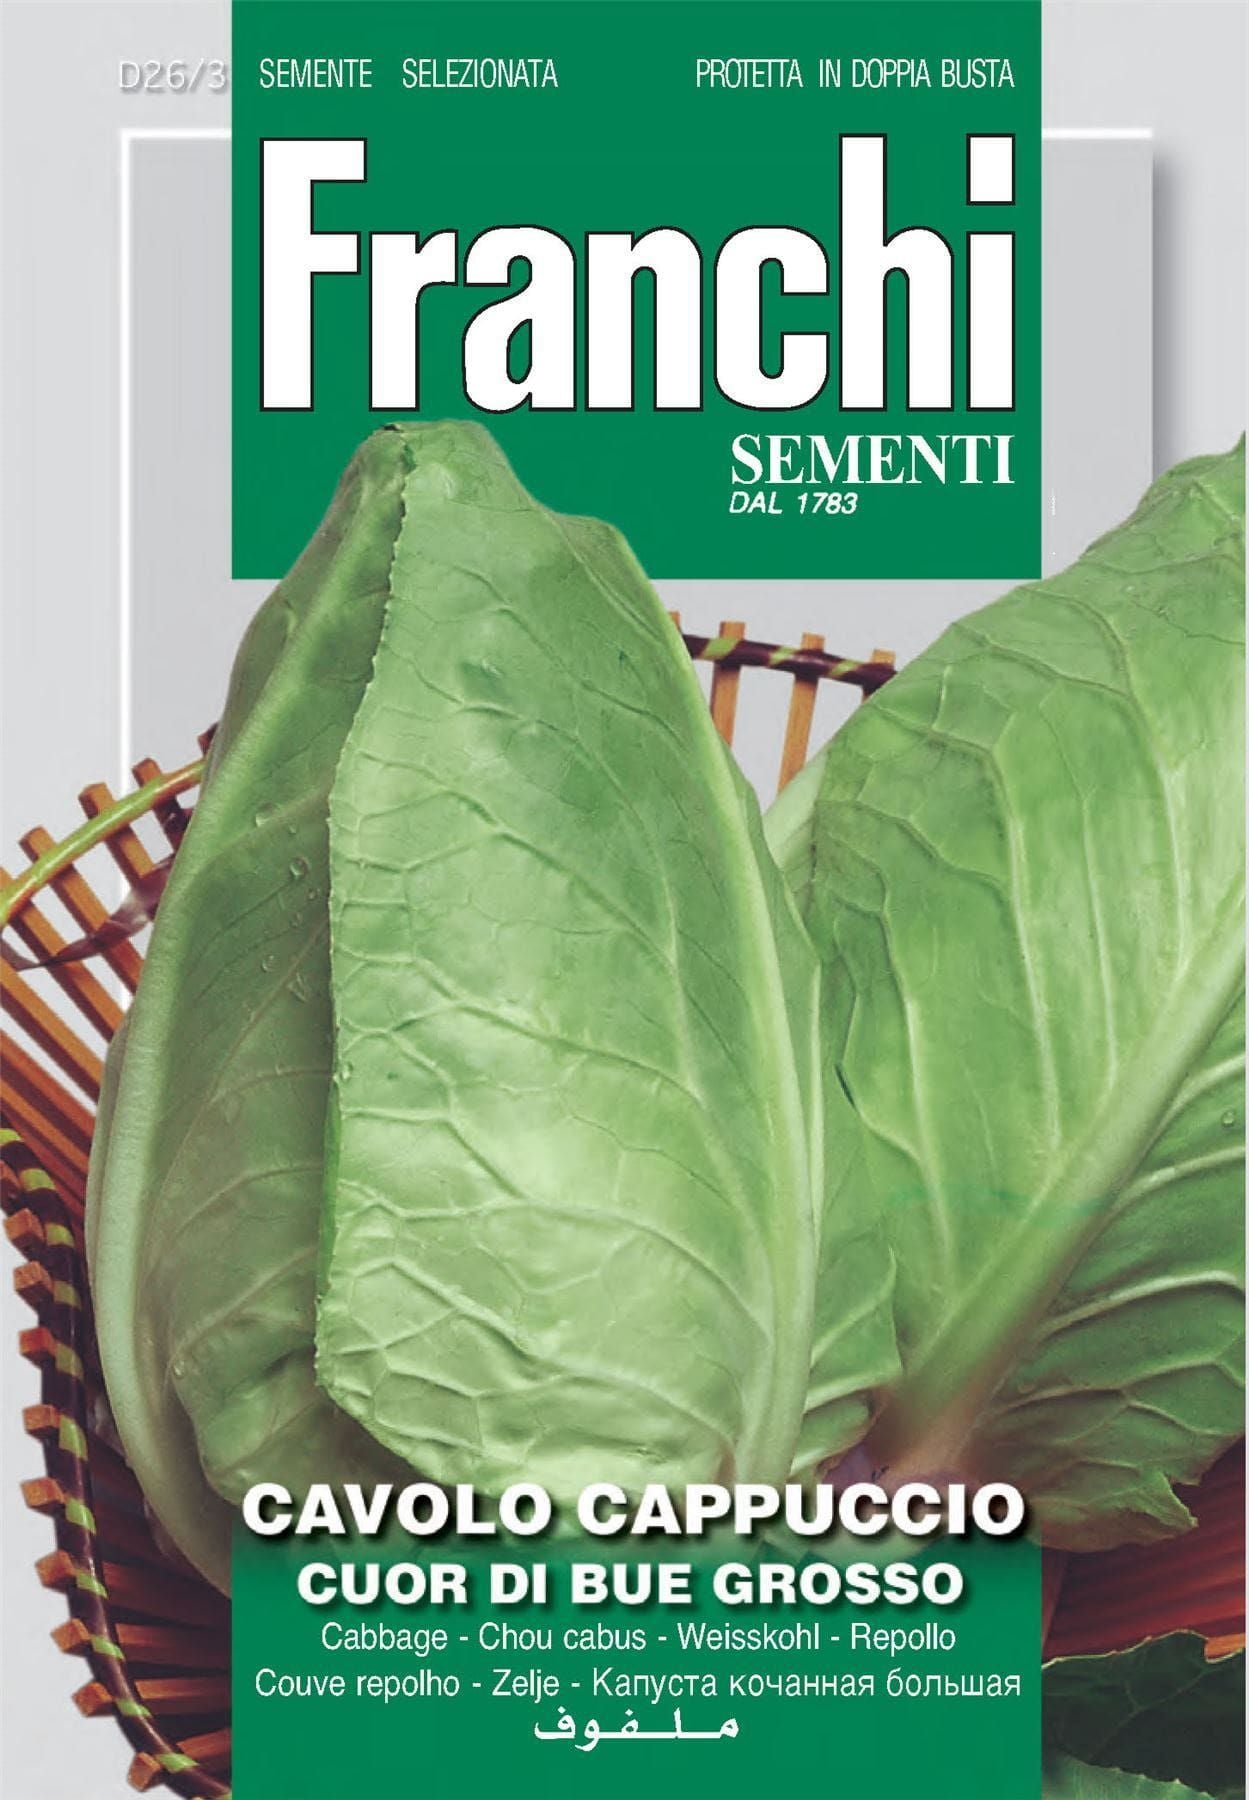 Franchi Seeds of Italy - DBO 26/3 - White Cabbage - Cuor Di Bue Grosso - Seeds